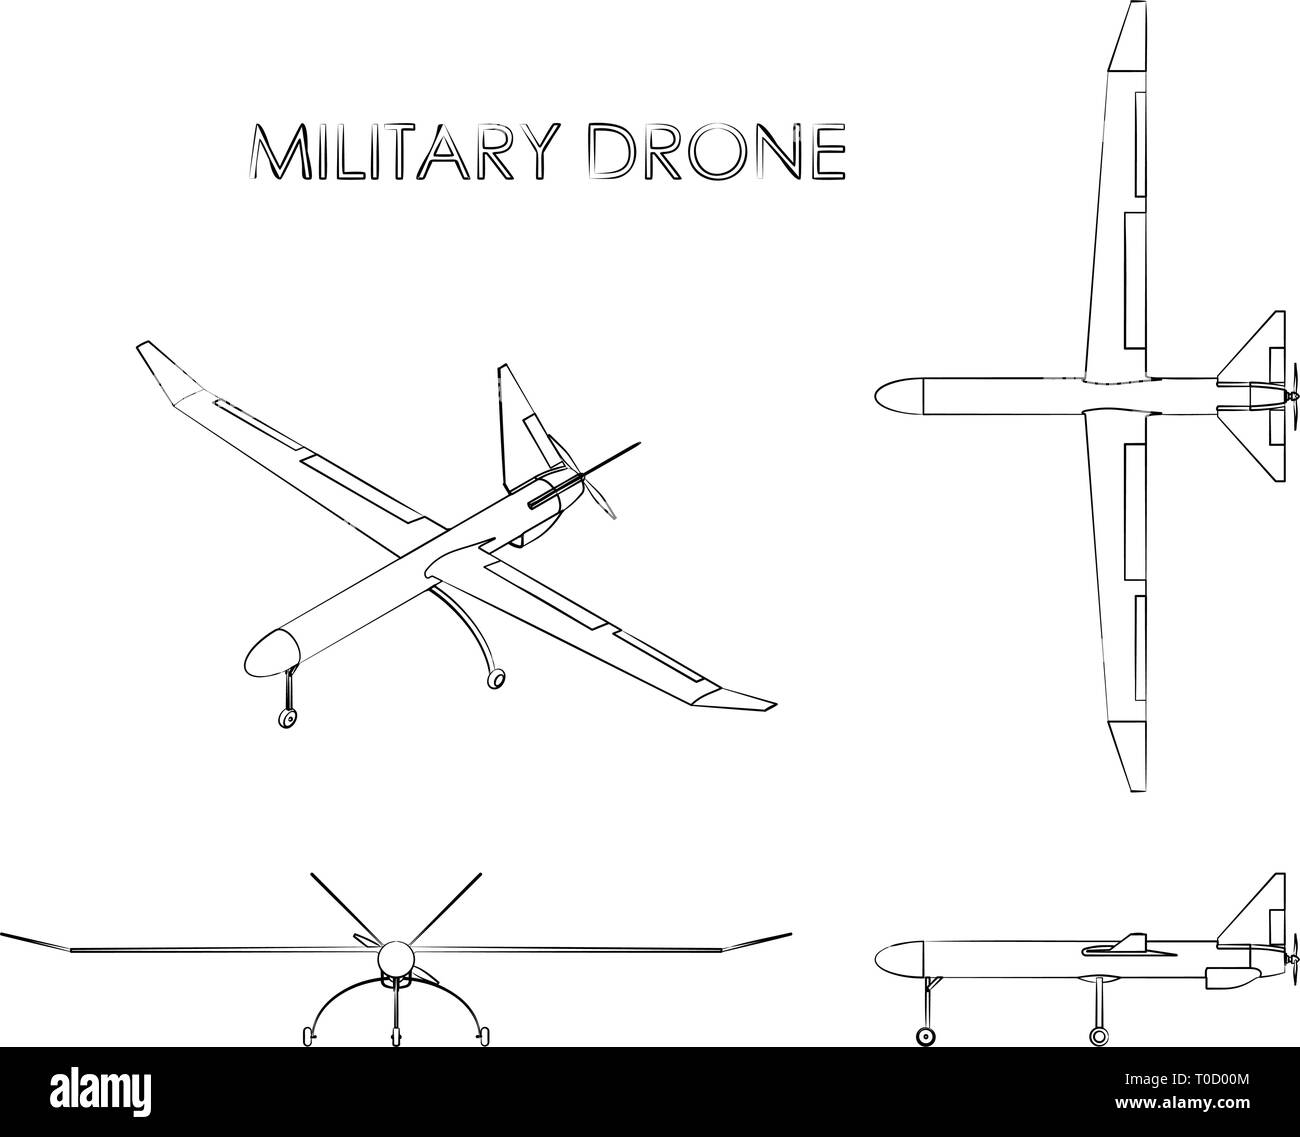 Military drone. Outline like a brushstrokes. Stock Vector